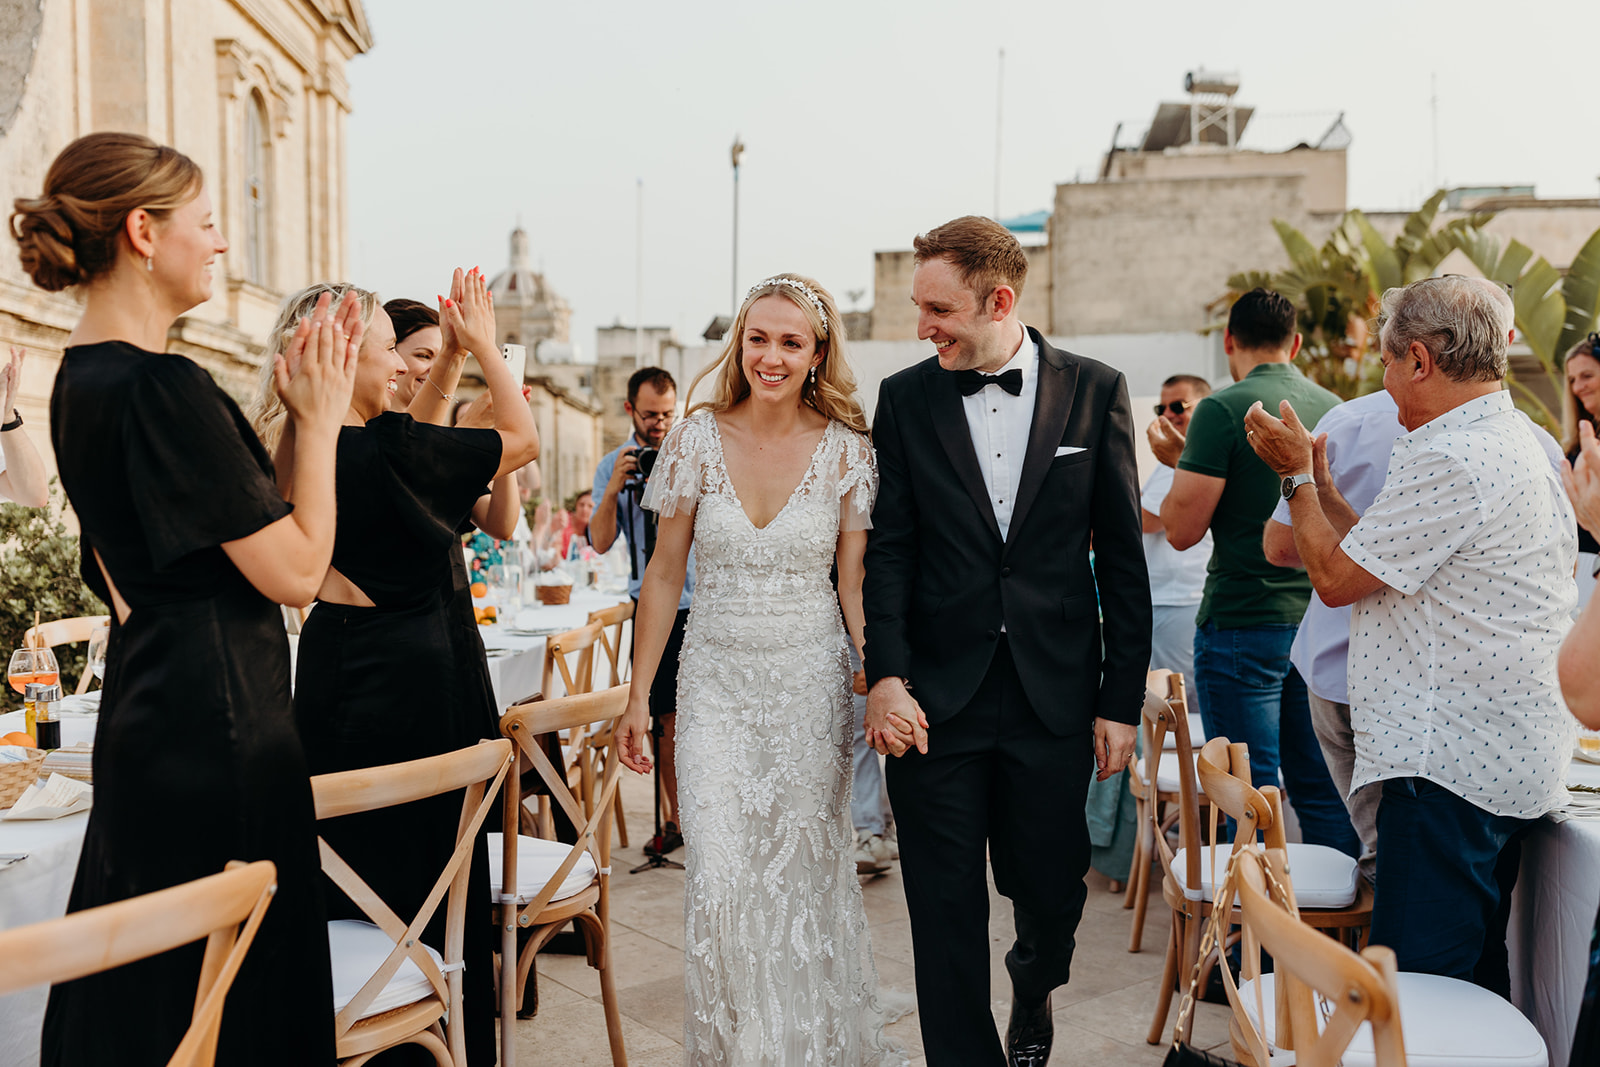 Bride and groom making an entrance to their rooftop wedding dinner in Malta